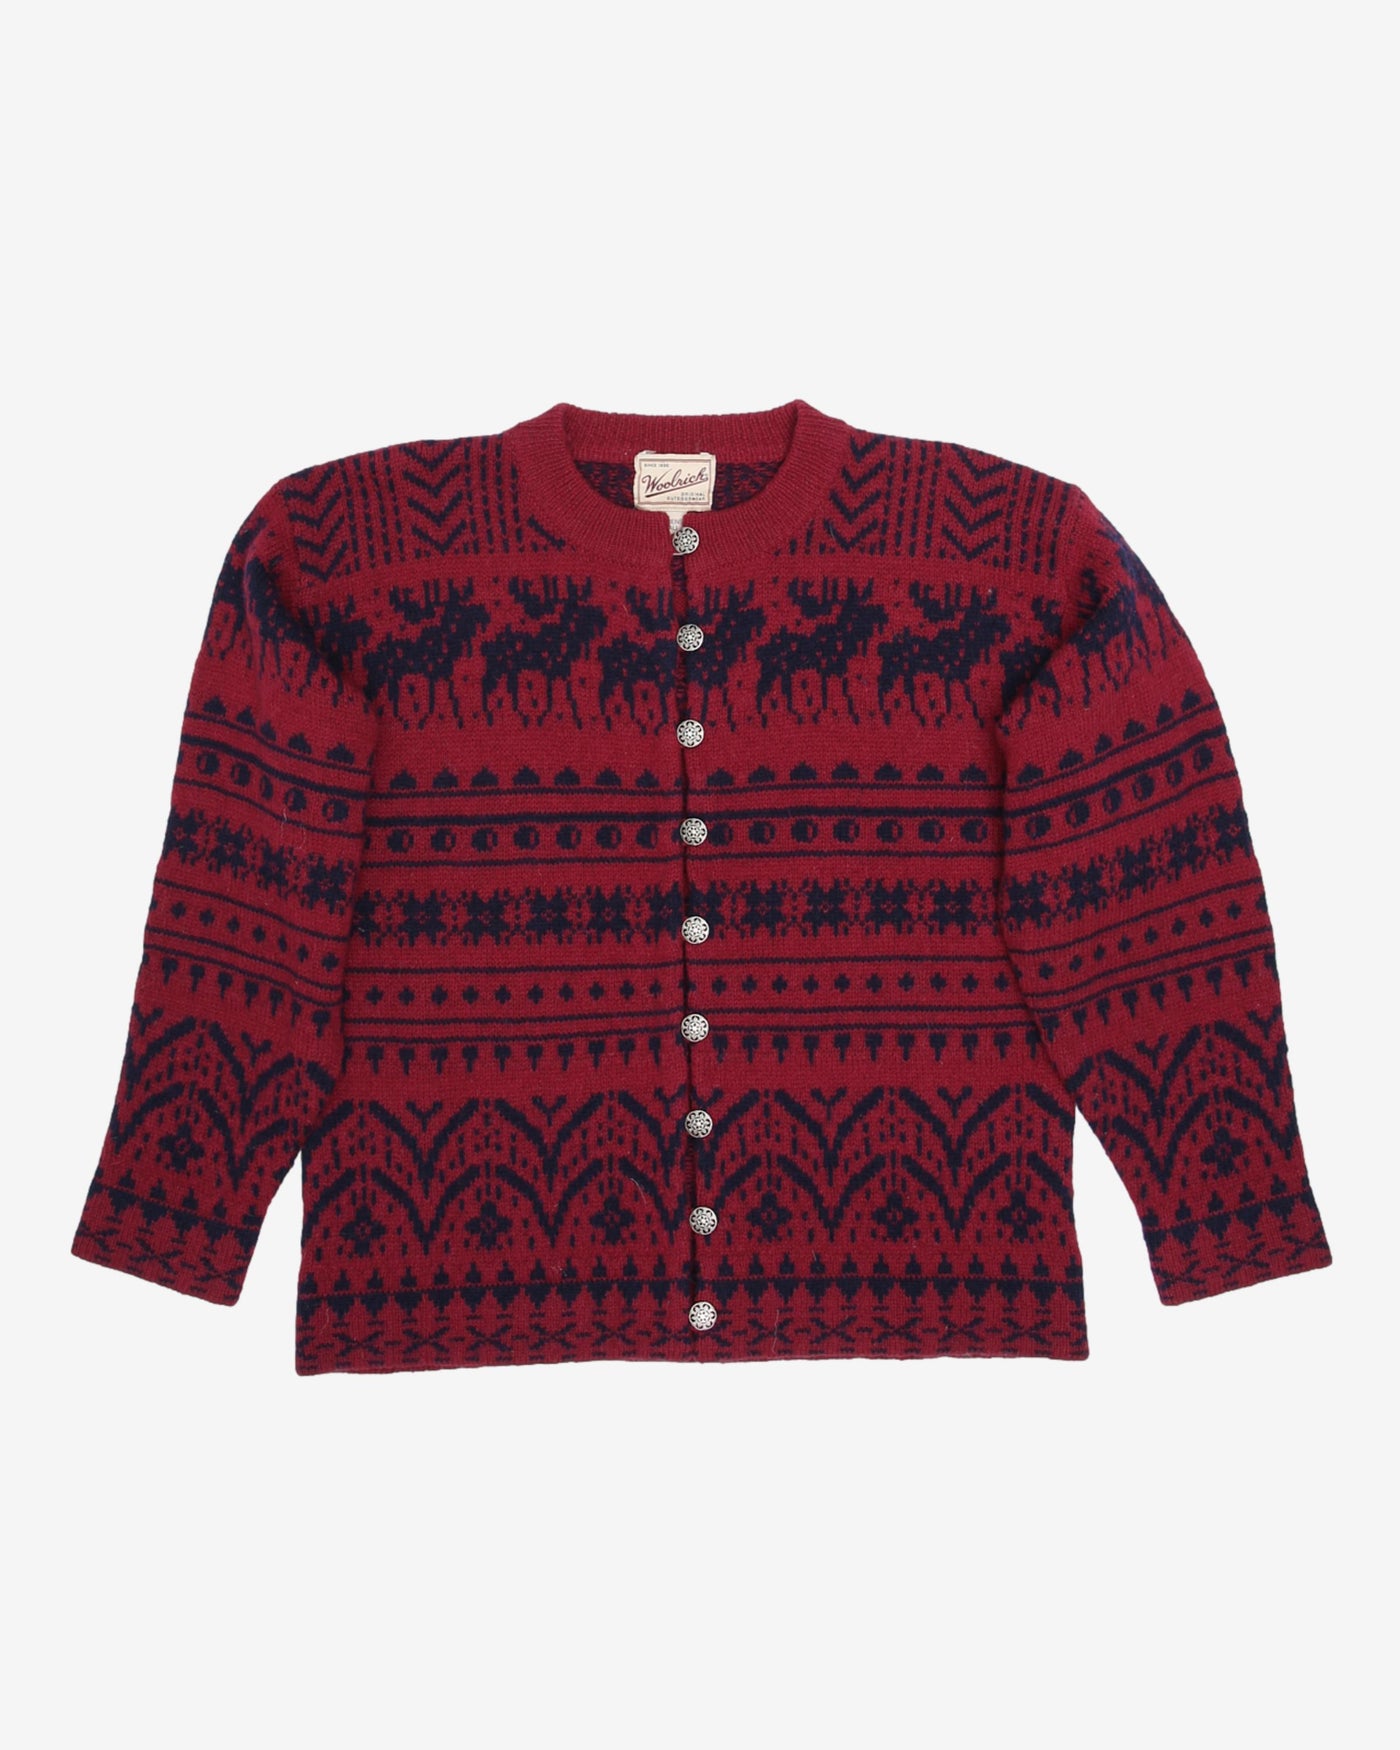 Woolrich Blue And Maroon Knitted Patterned Cardigan - M